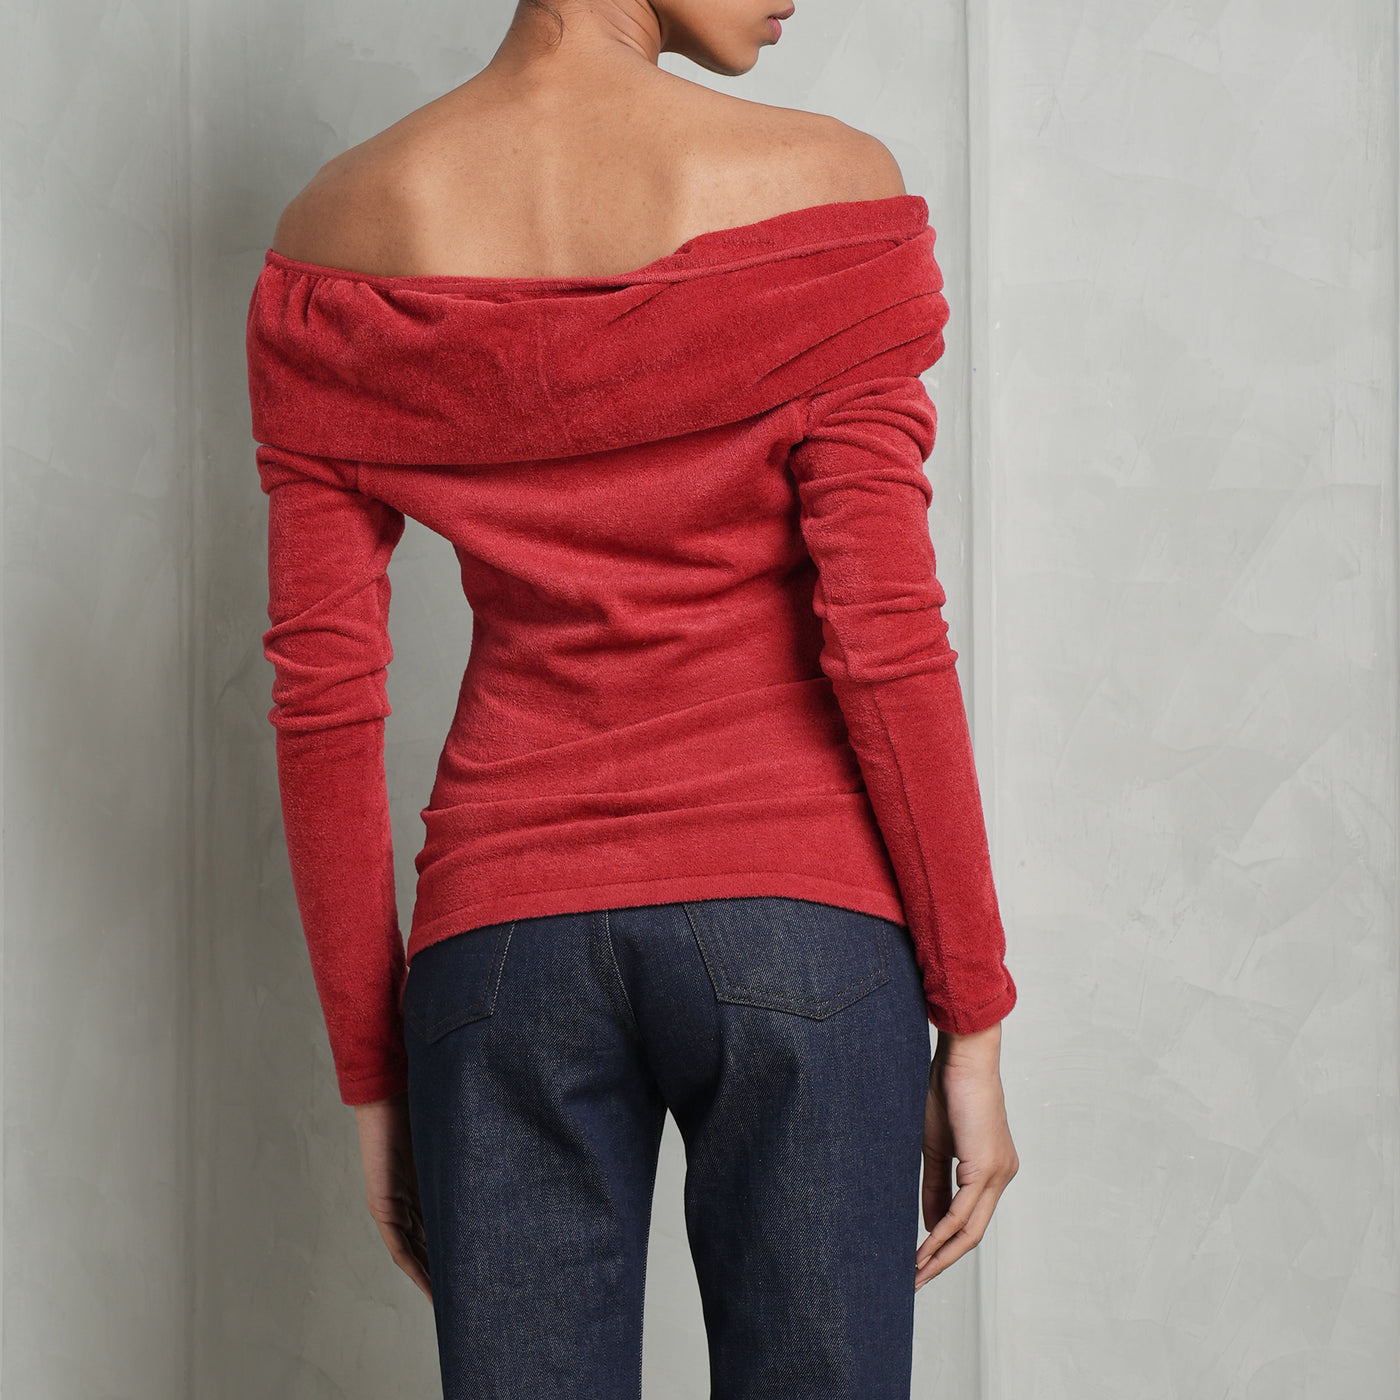 ALEXANDRFE VAUTHIER red draped long sleeve top